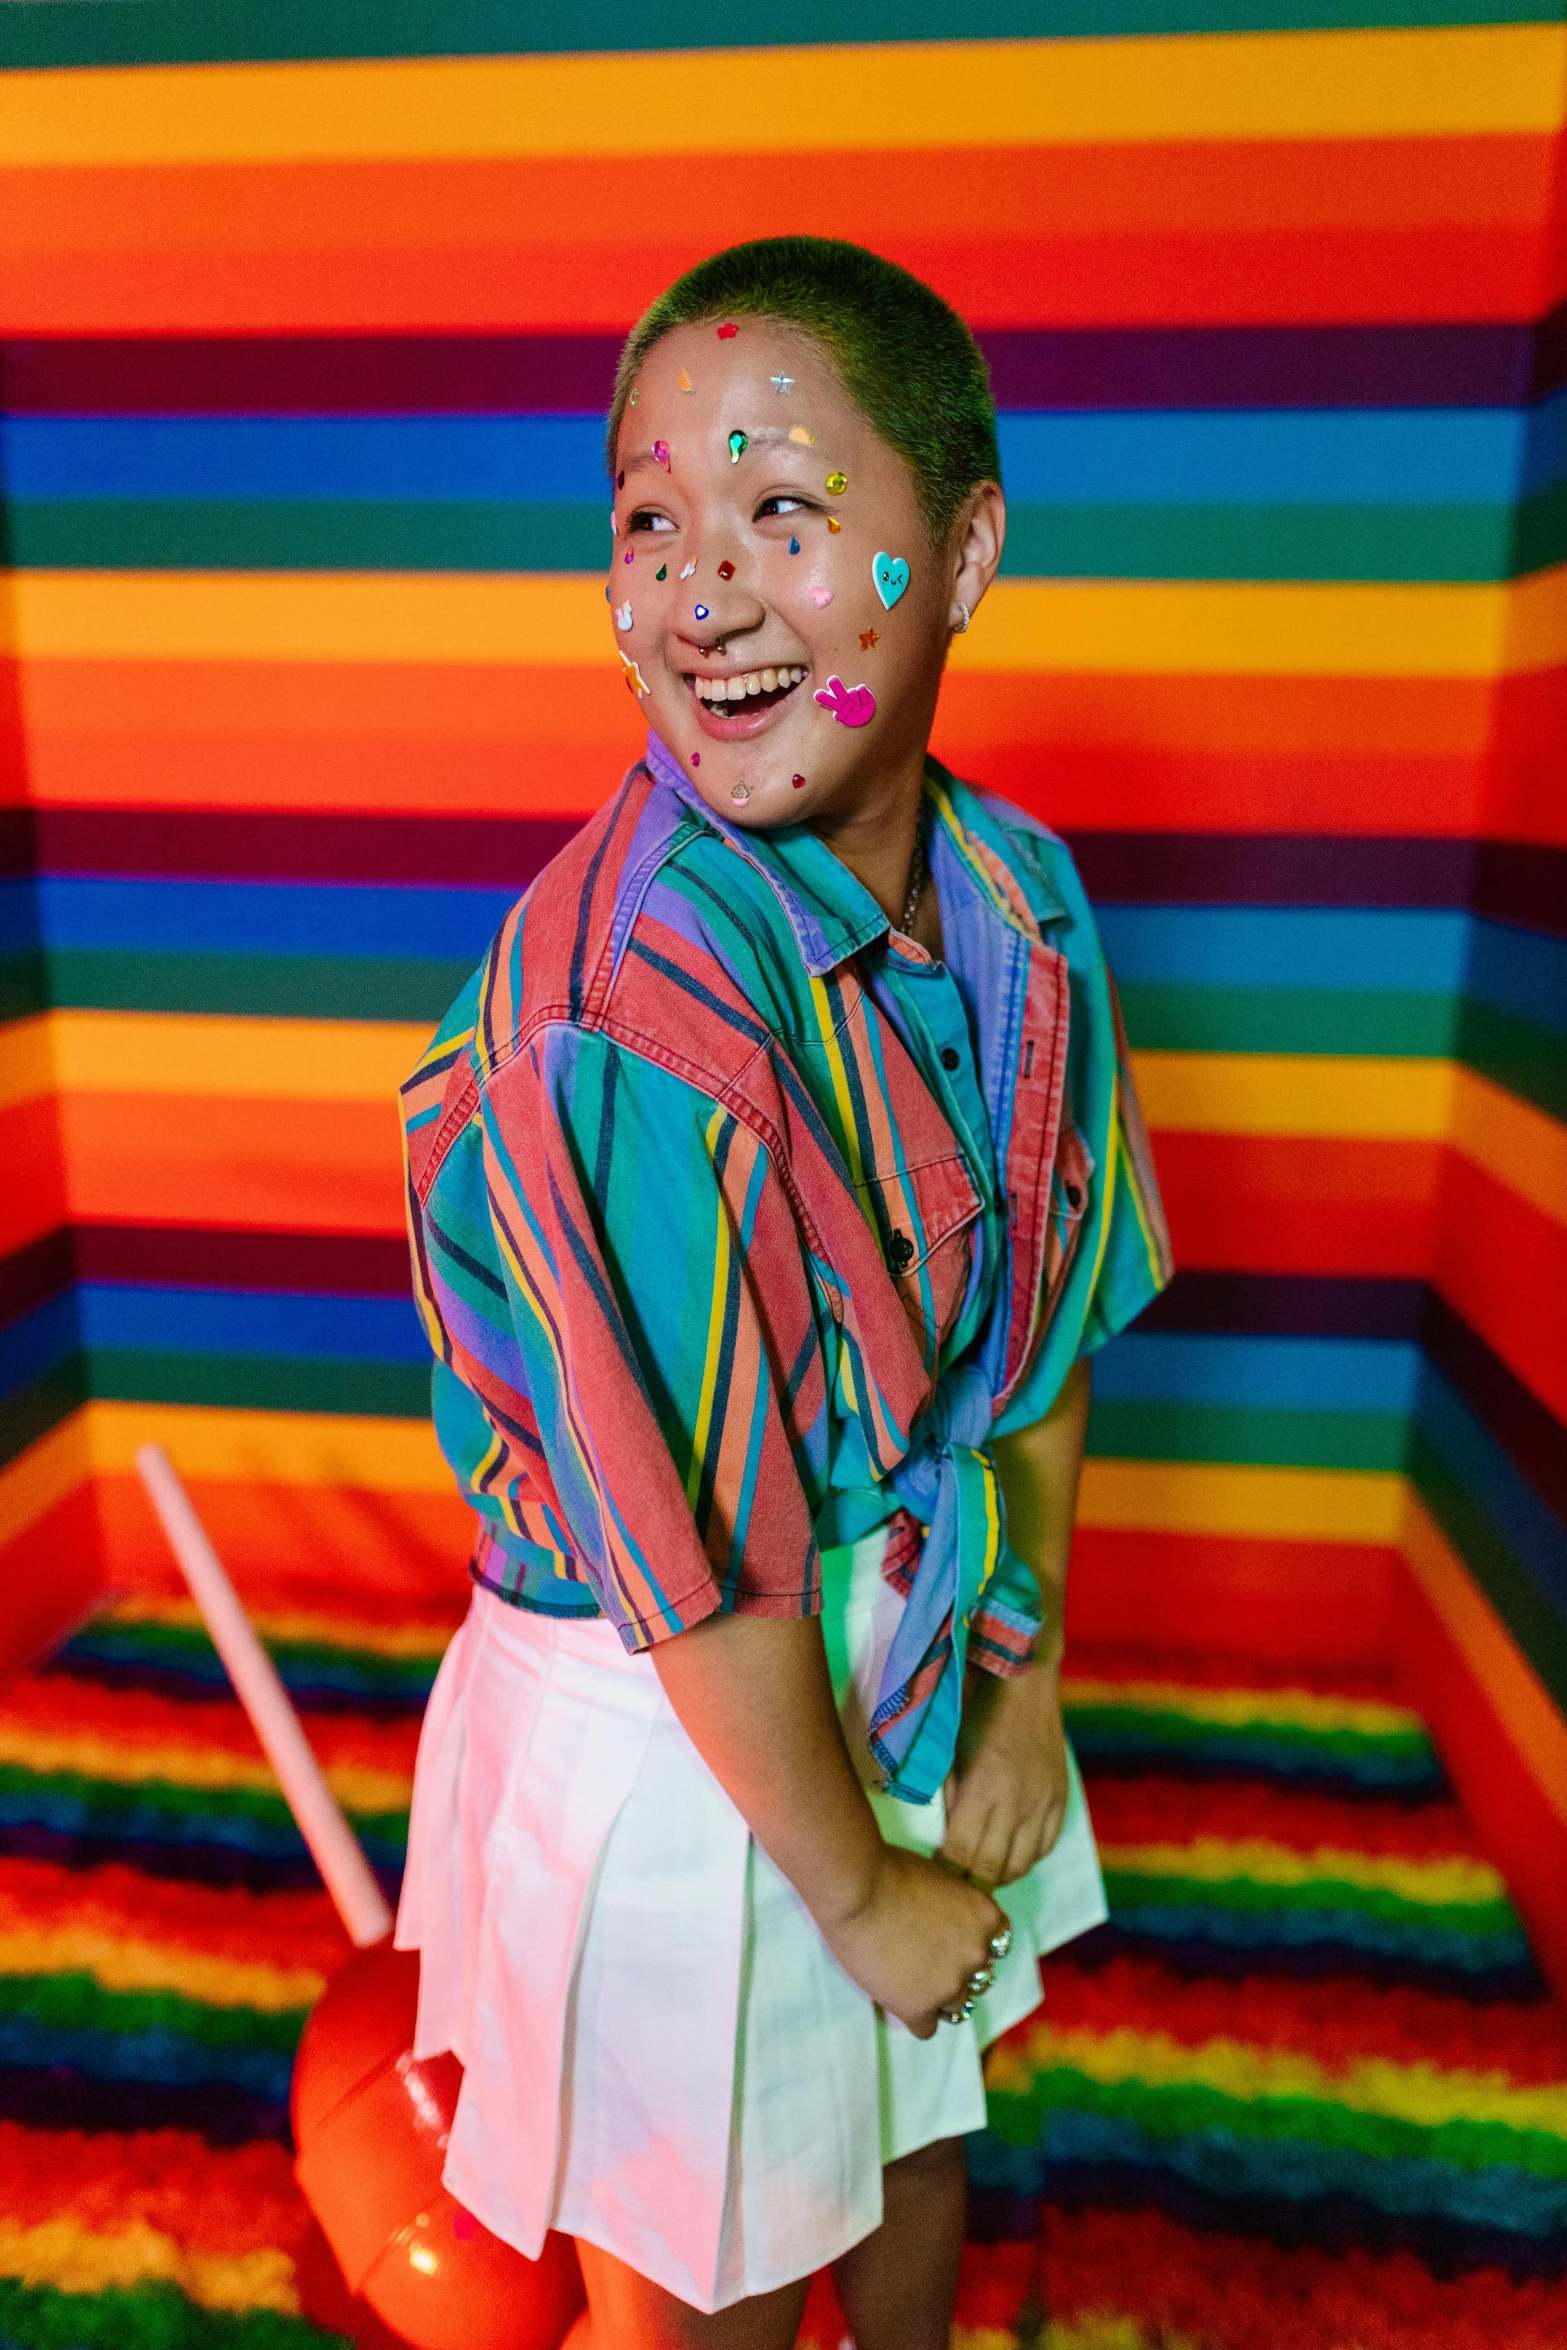 a girl is standing in a room painted with rainbows